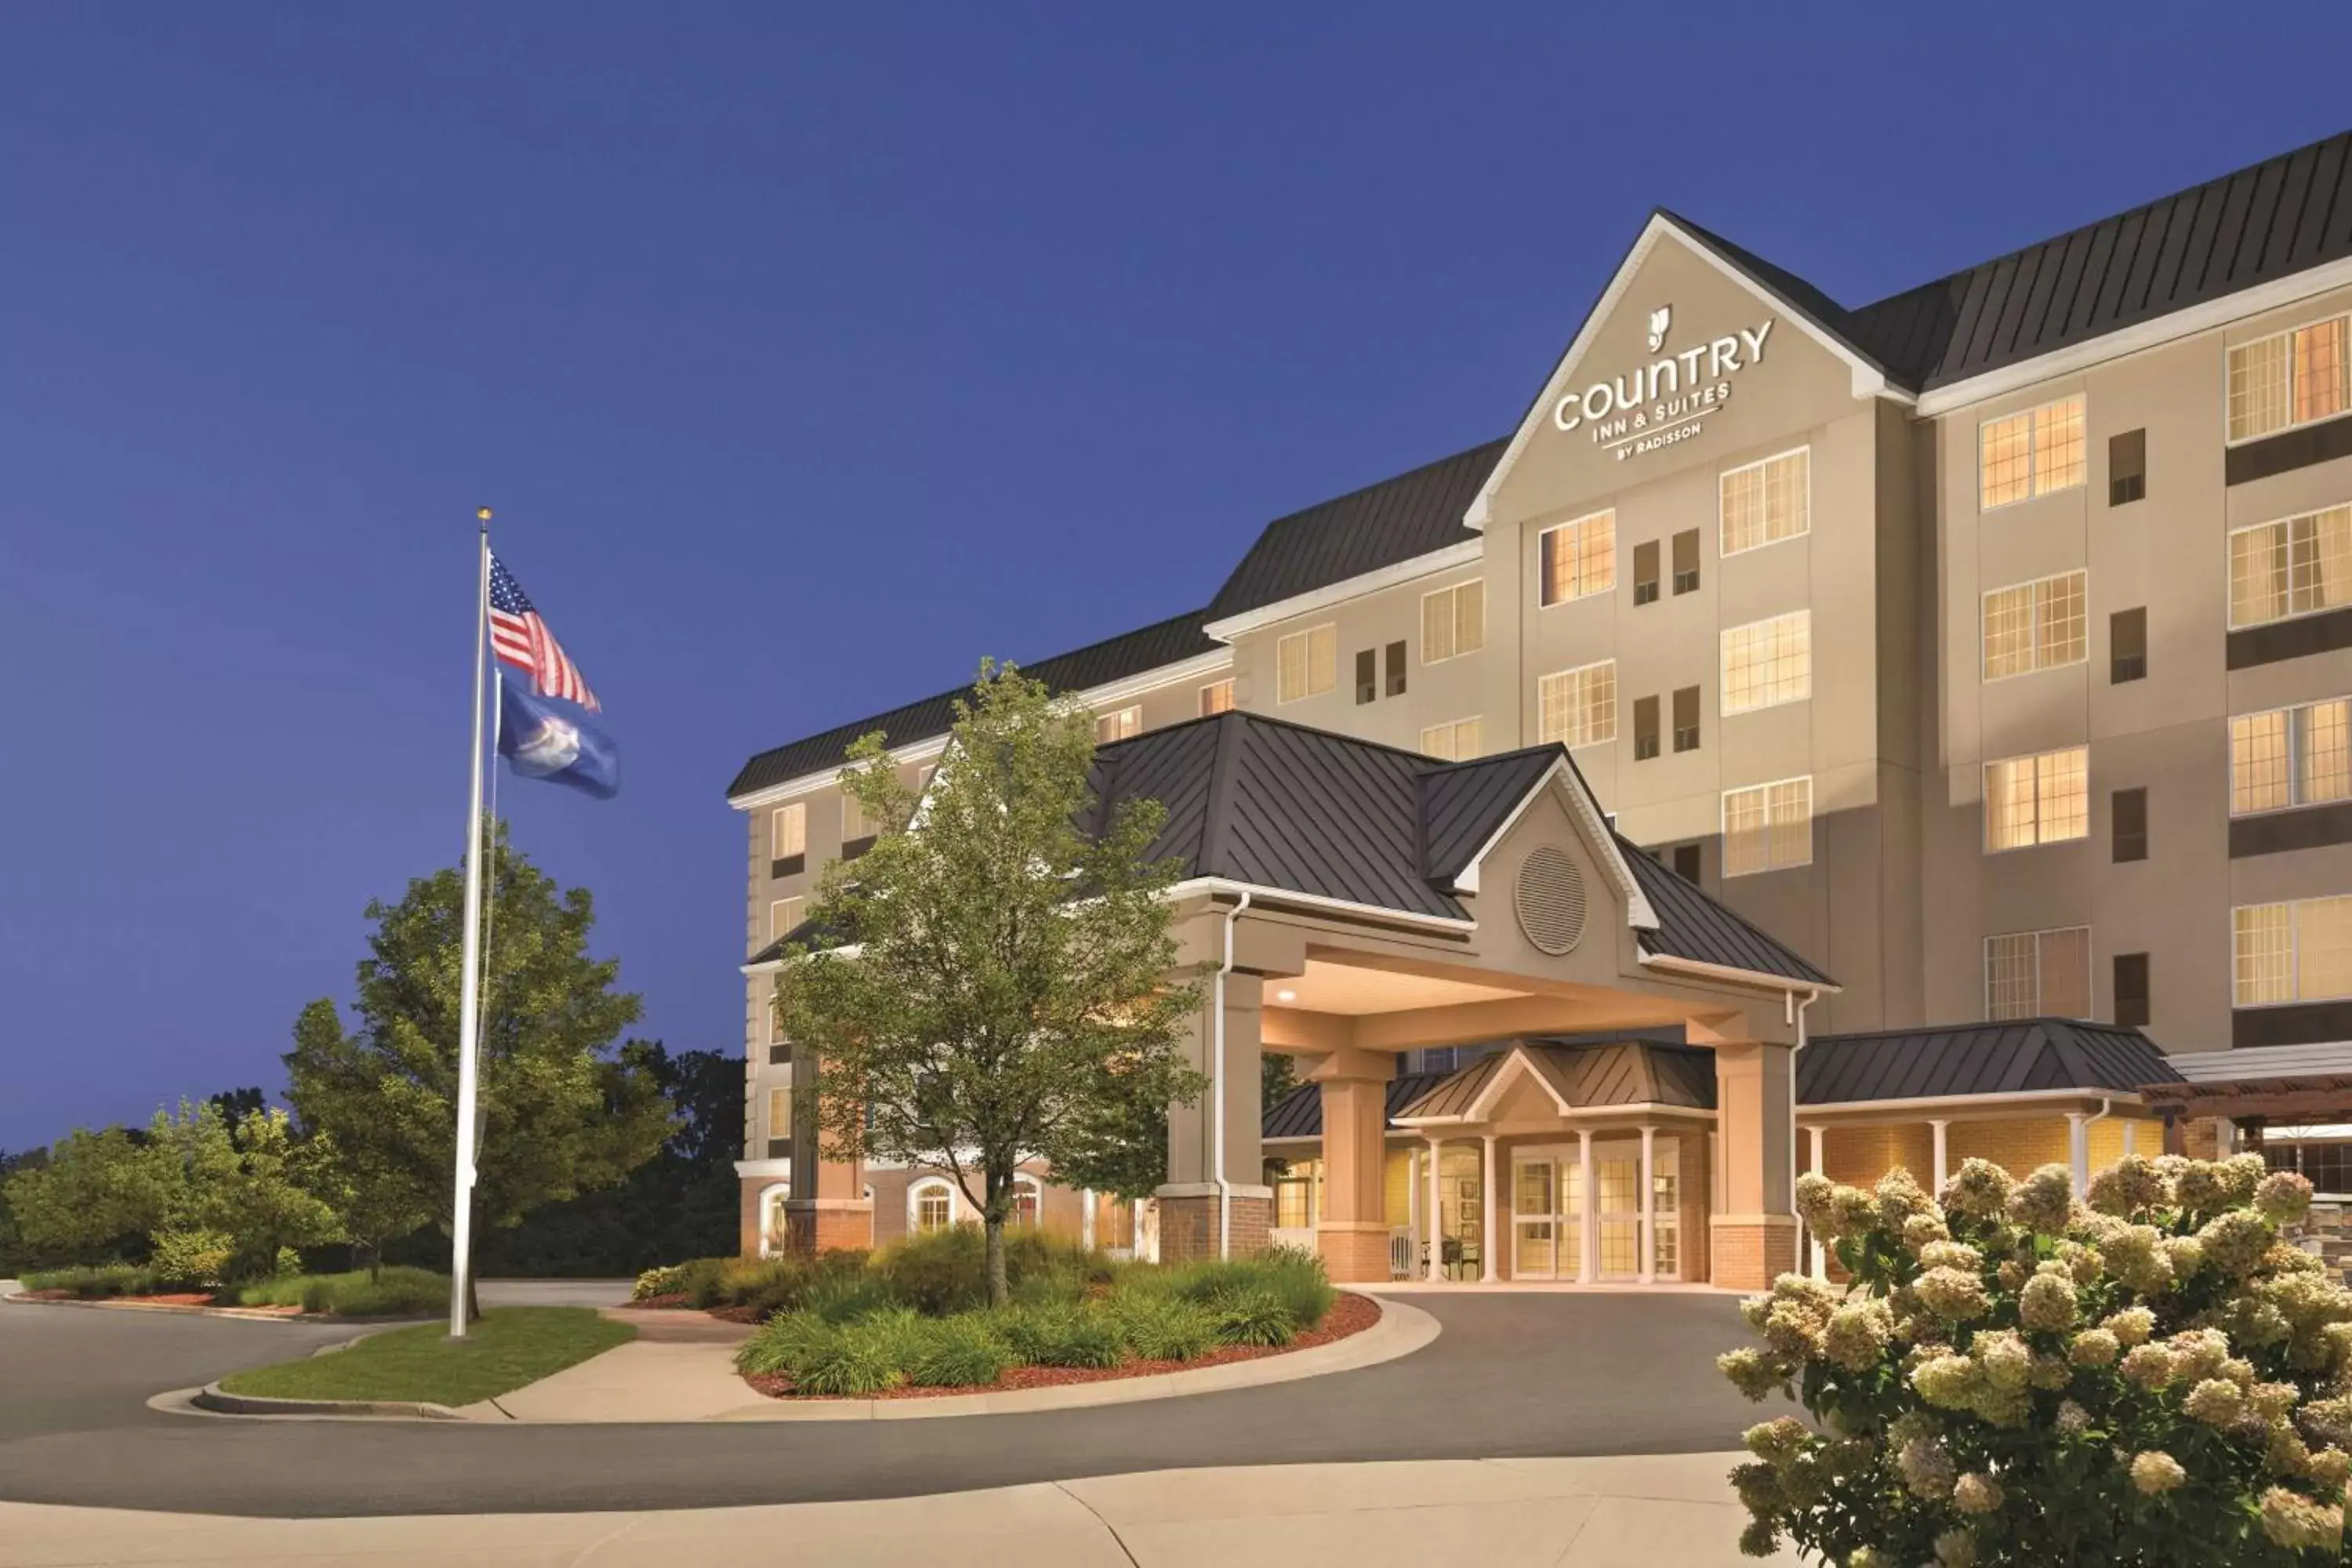 Property Building in Country Inn & Suites by Radisson, Grand Rapids East, MI